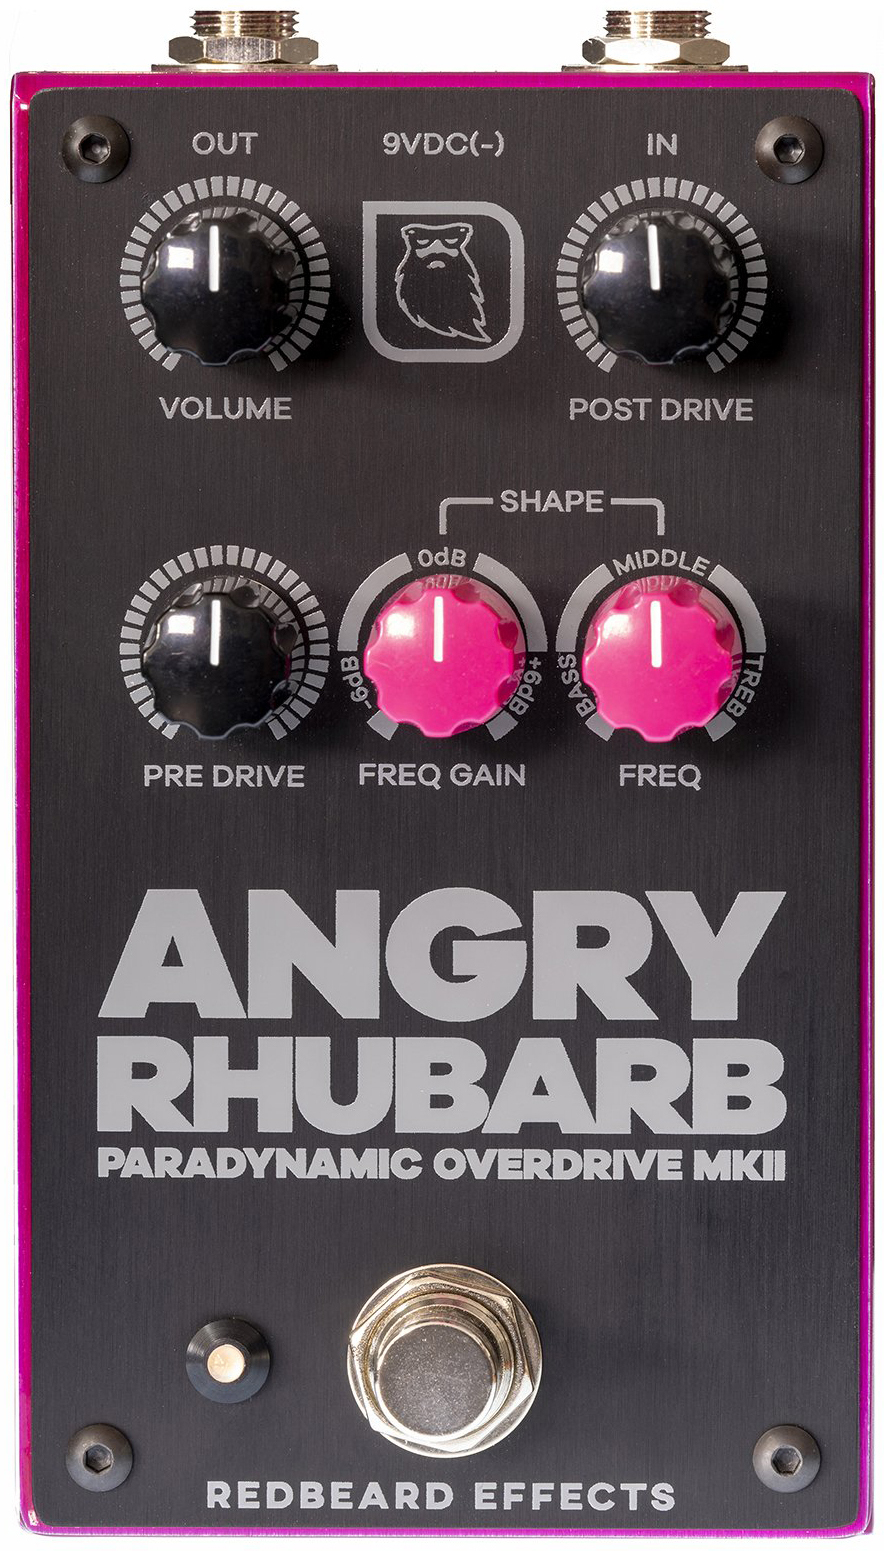 Redbeard Effects Angry Rhubarb Paradynamic Overdrive Mkii - Overdrive/Distortion/Fuzz Effektpedal - Main picture